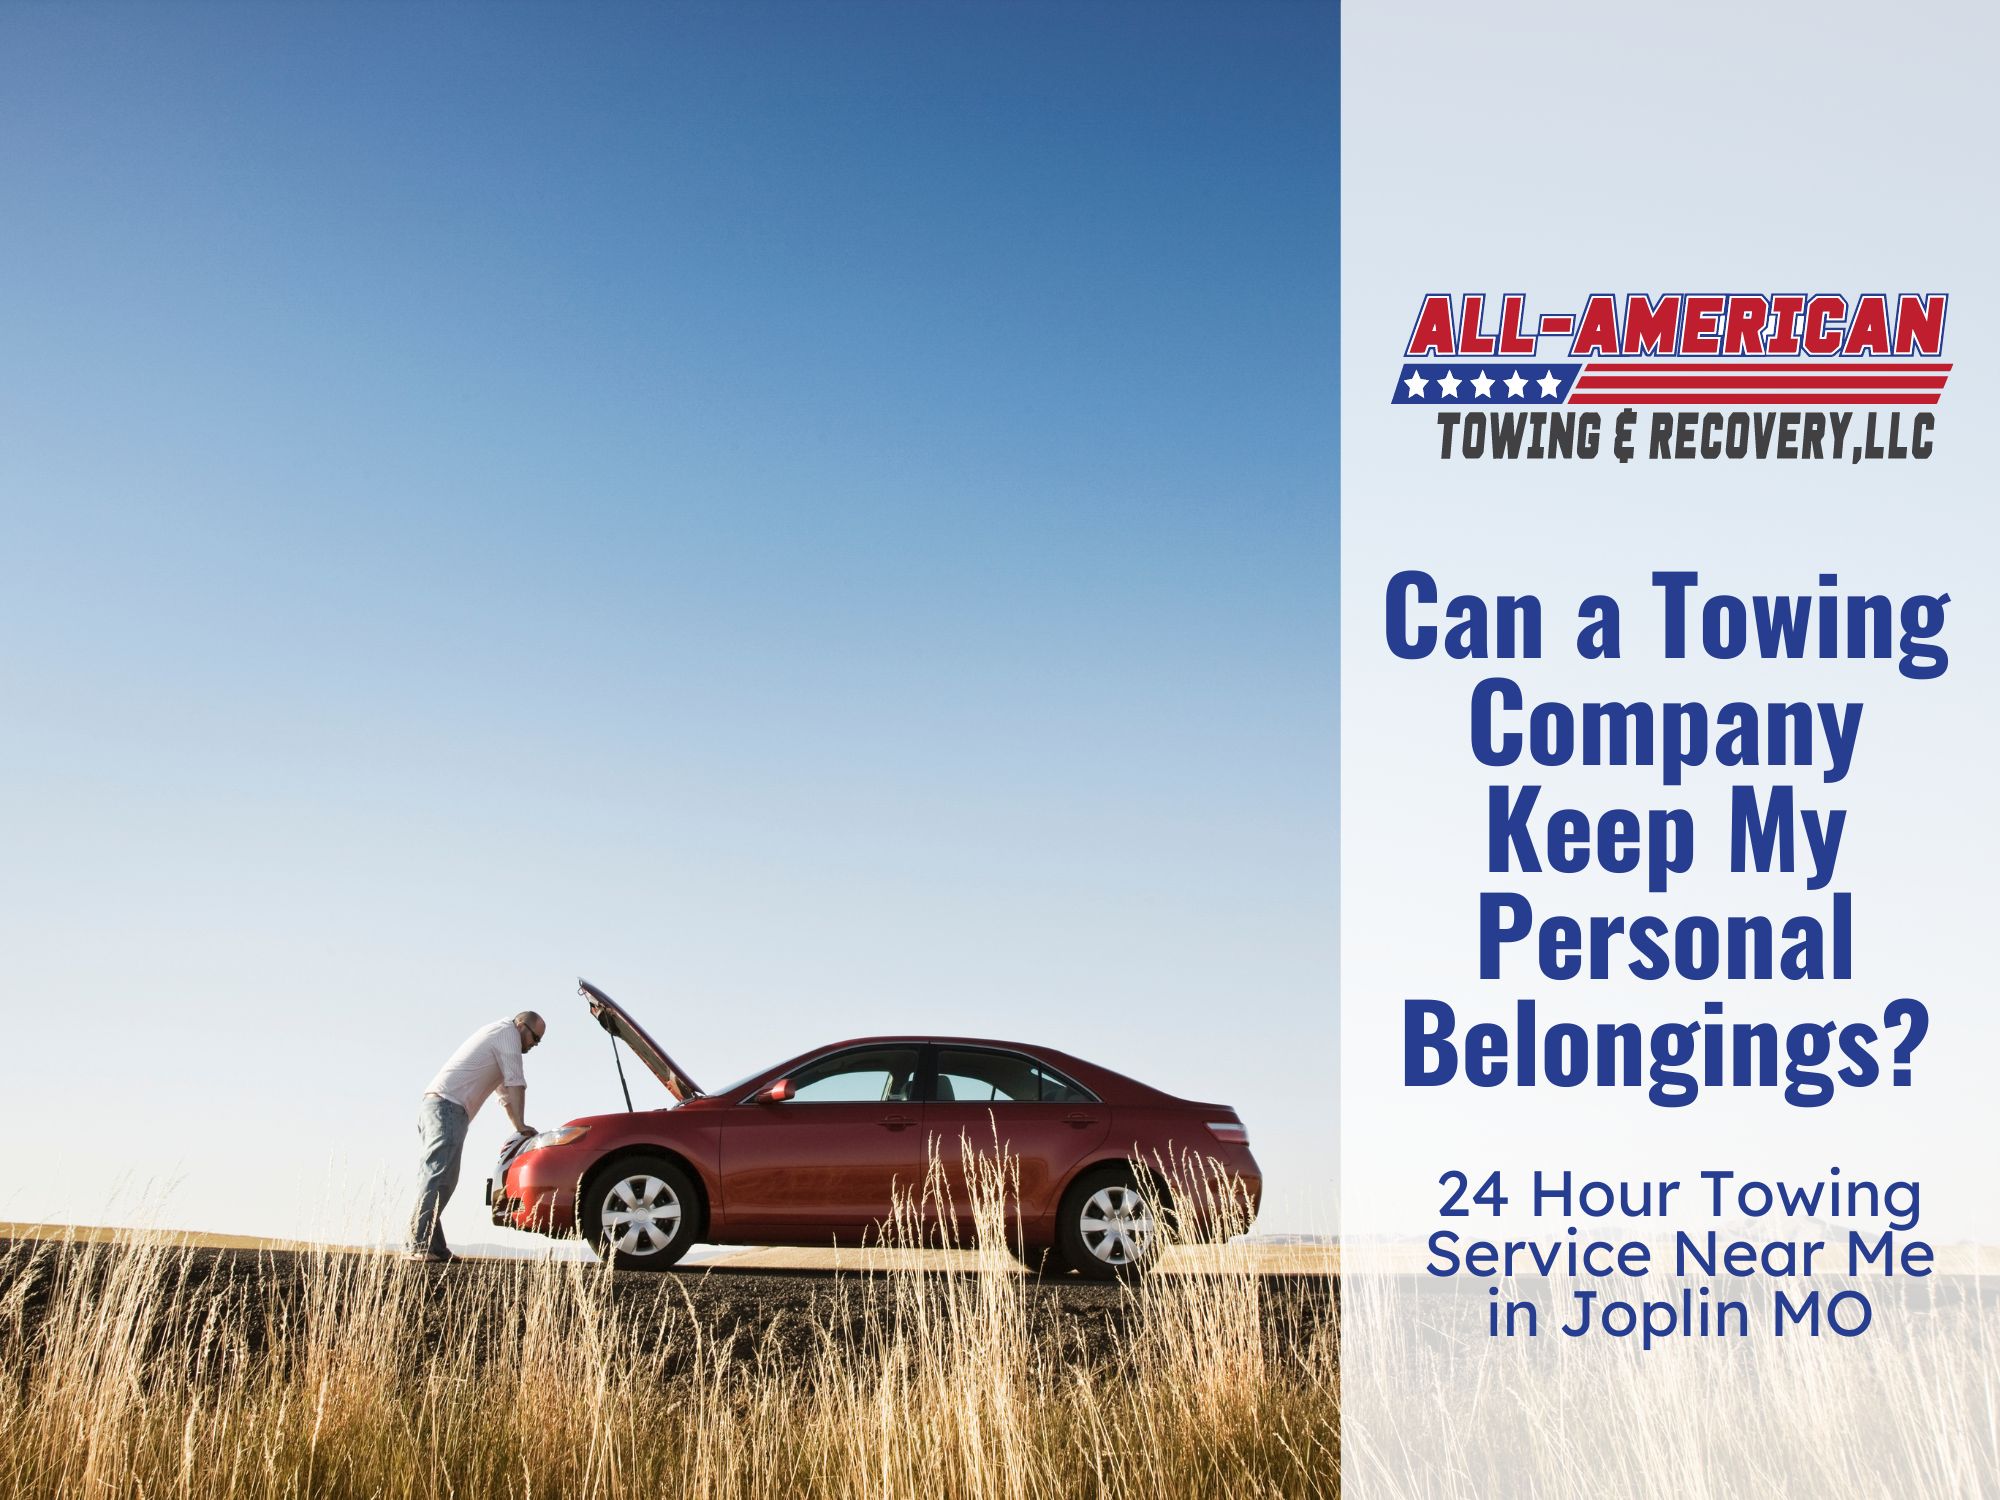 Around the Clock Roadside Assistance and Towing!